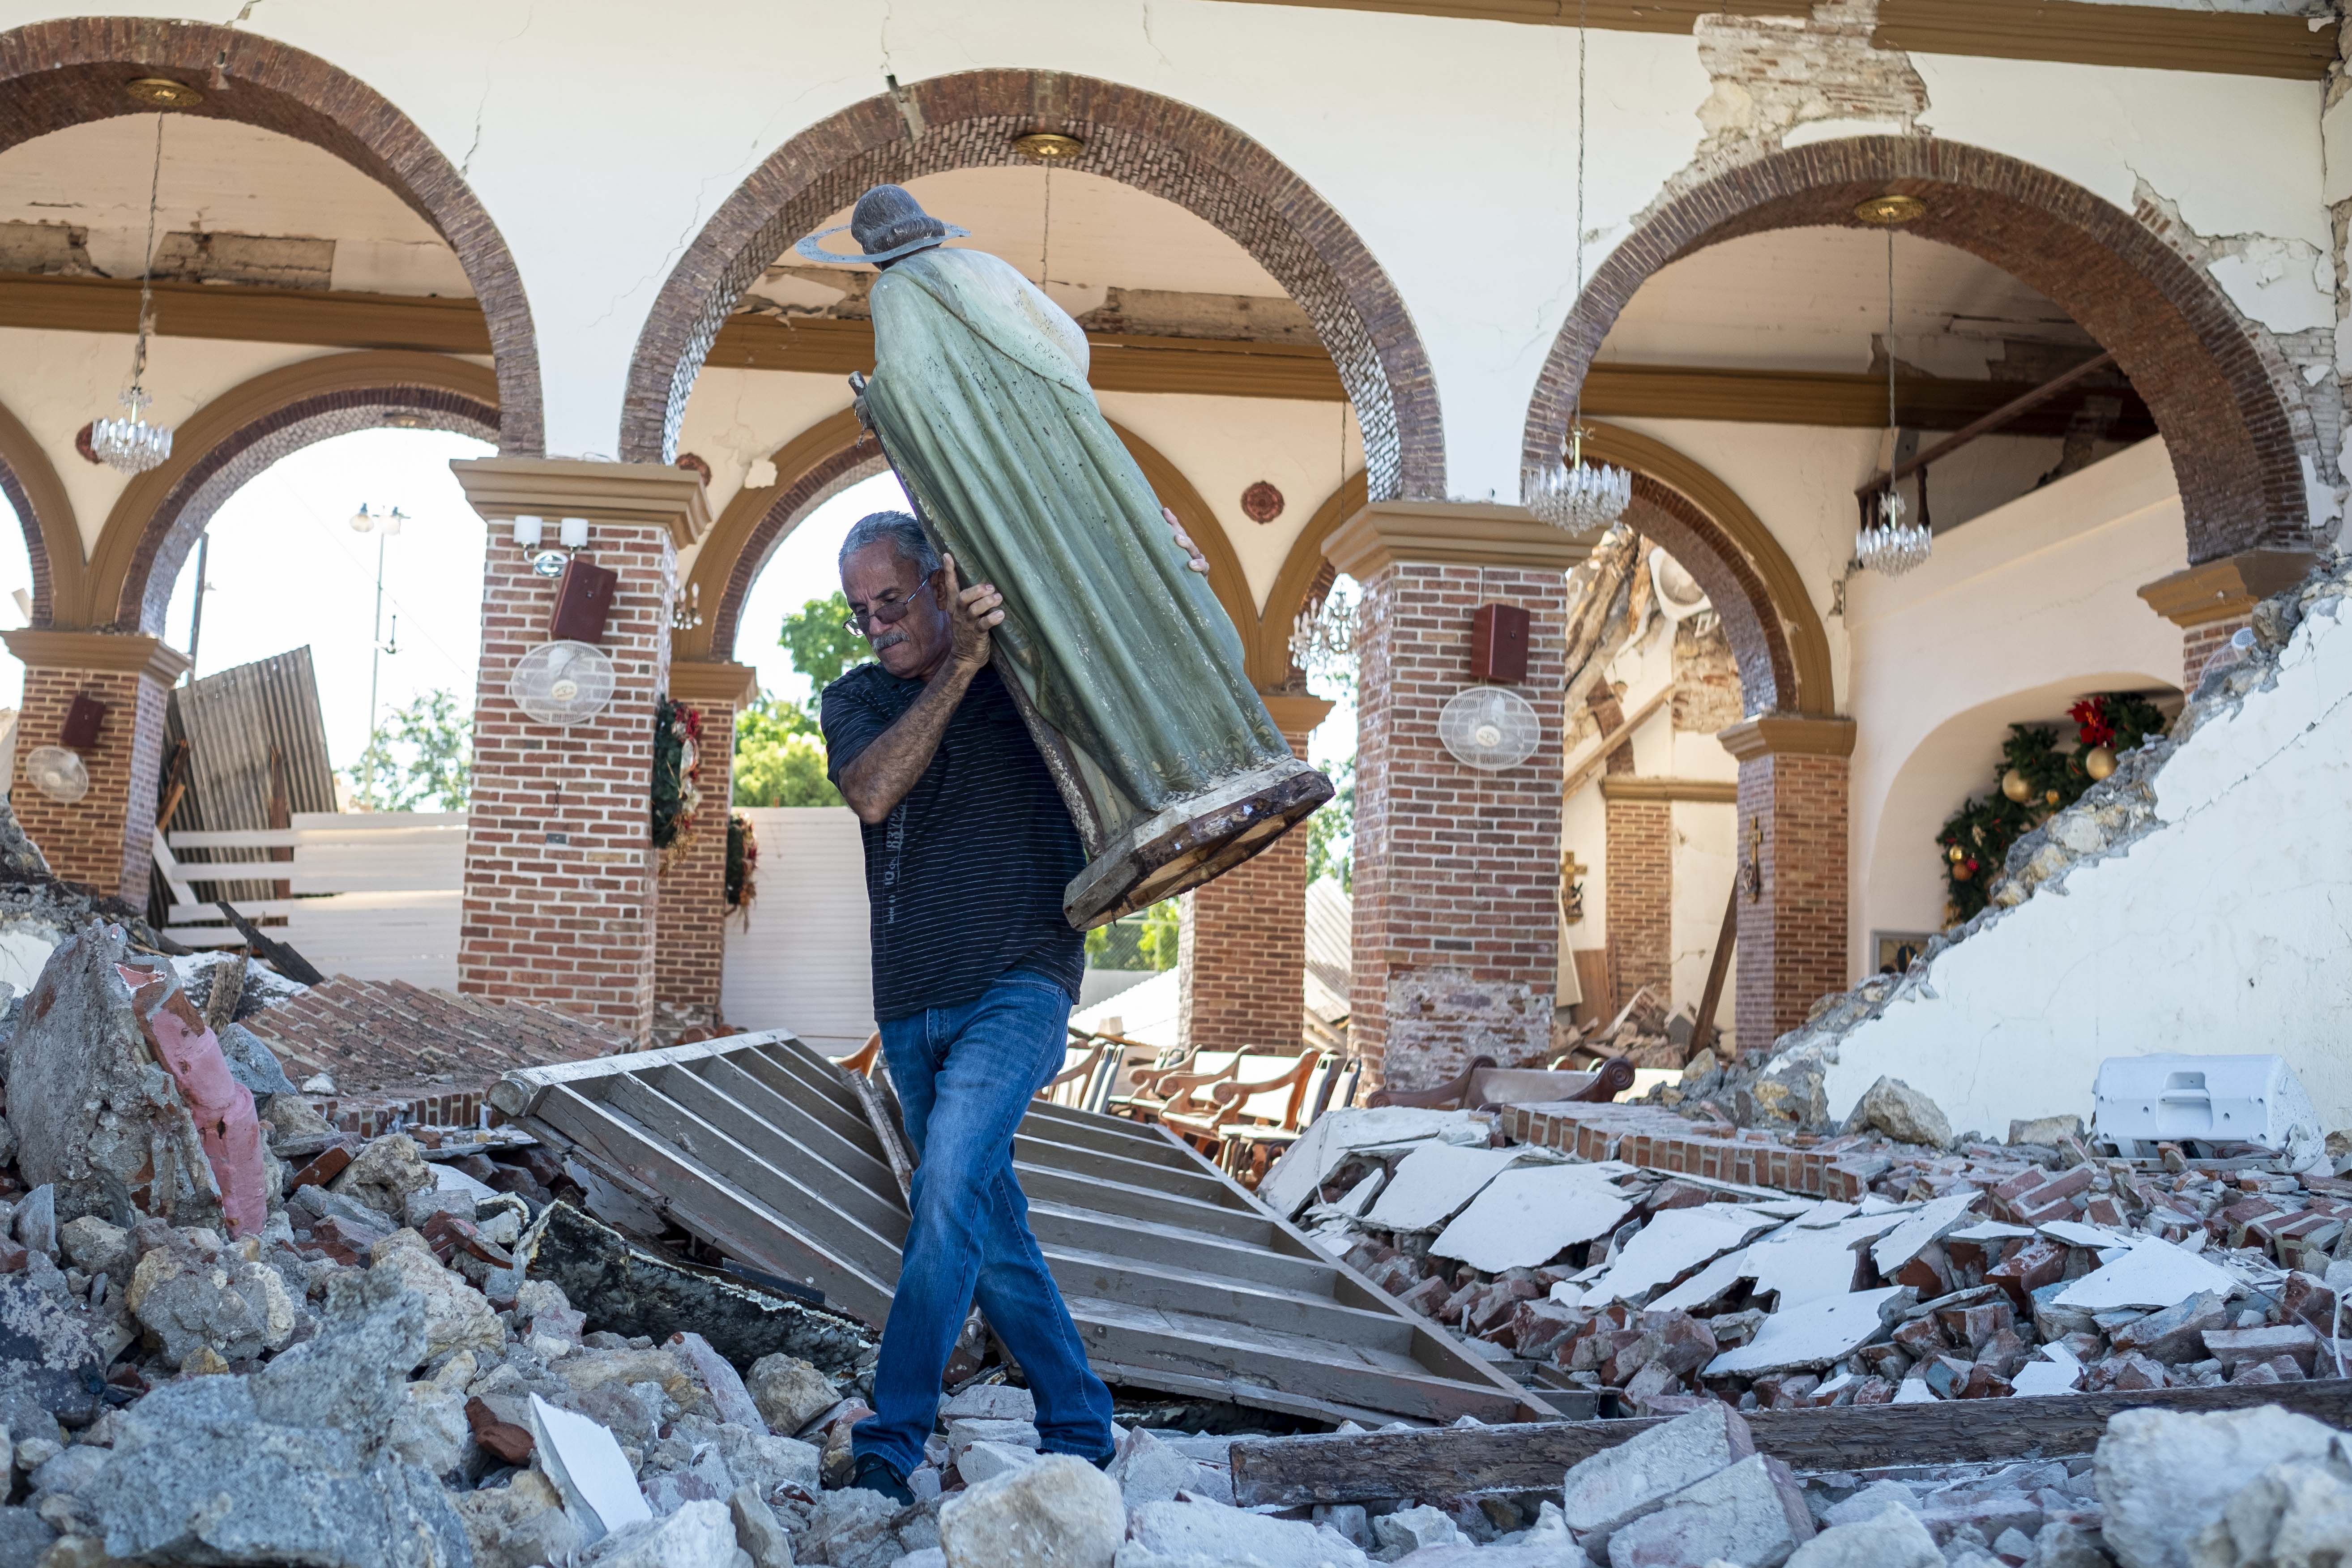 A man carries a St. Jude statue from the Inmaculada Concepcion church ruins that was built in 1841 and collapsed after an earthquake hit the island in Guayanilla